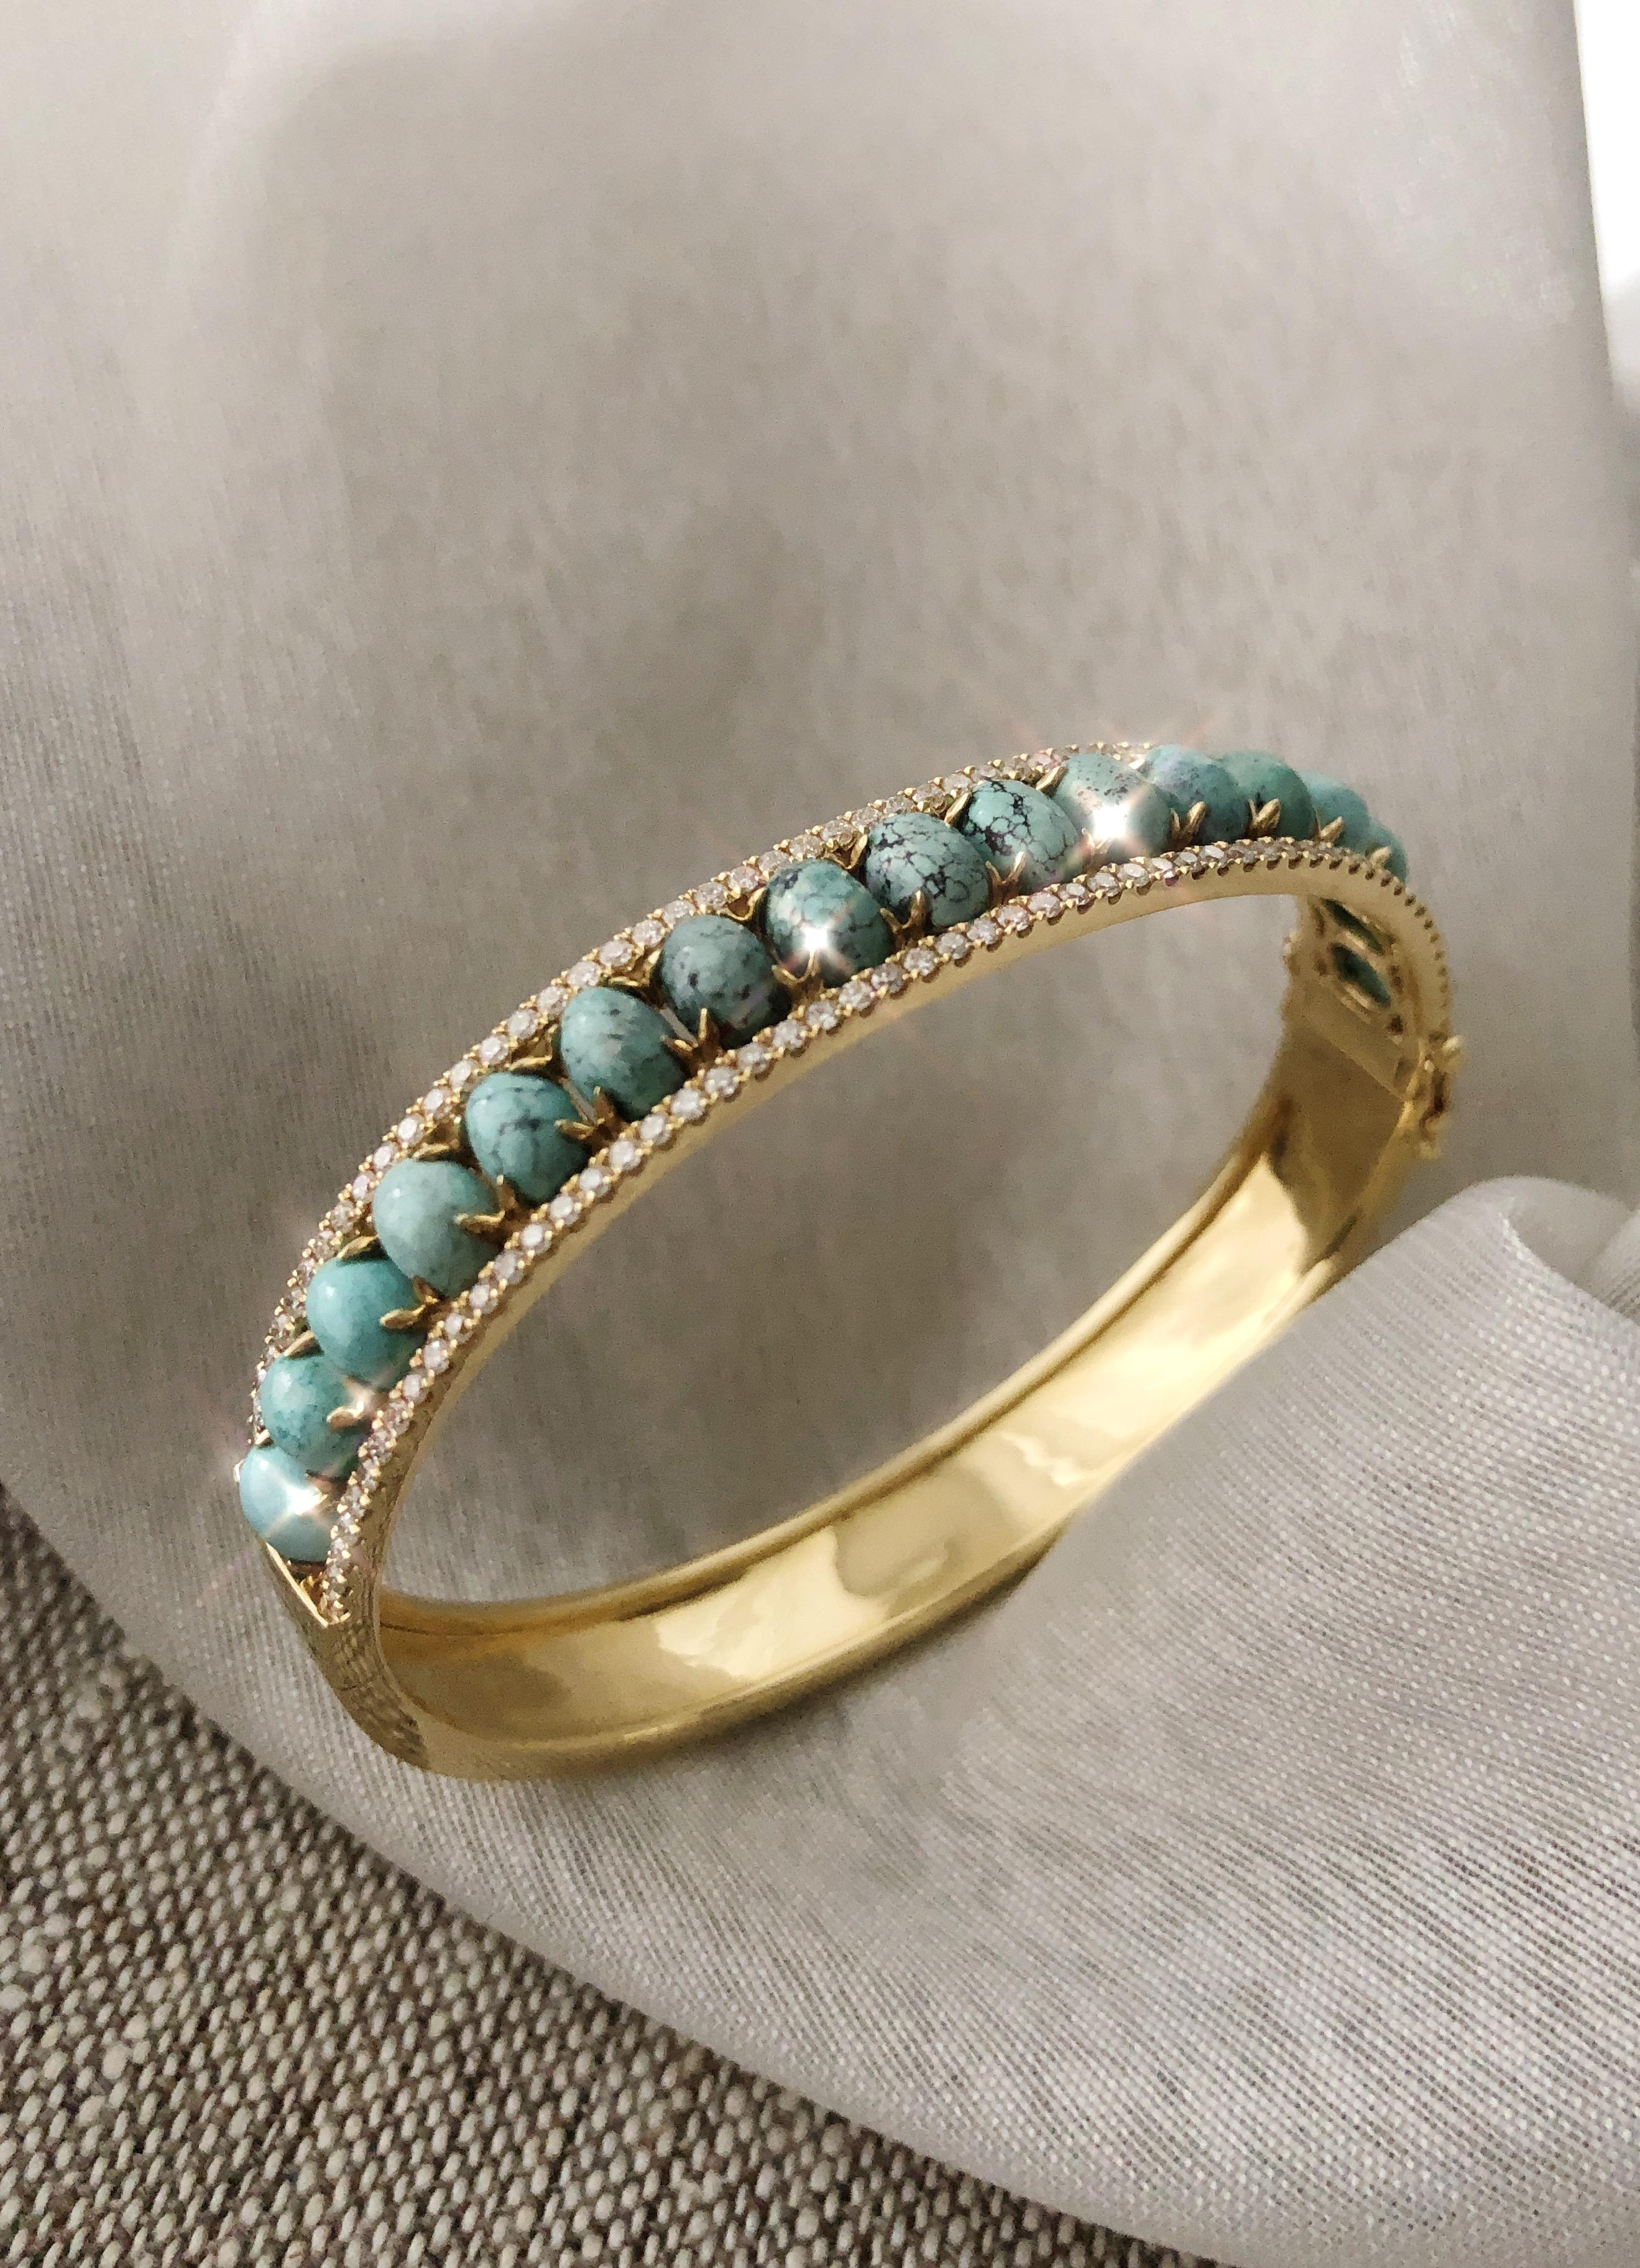 Sleek and Contemporary, wear this bangle from day to night. Set with cabochon natural turquoise and flanked by rows of white diamonds in 18k gold. Diamond weight of 1.11cts in 25.9g gold (size M). Hinged bangle with side clasp and safety clasps.